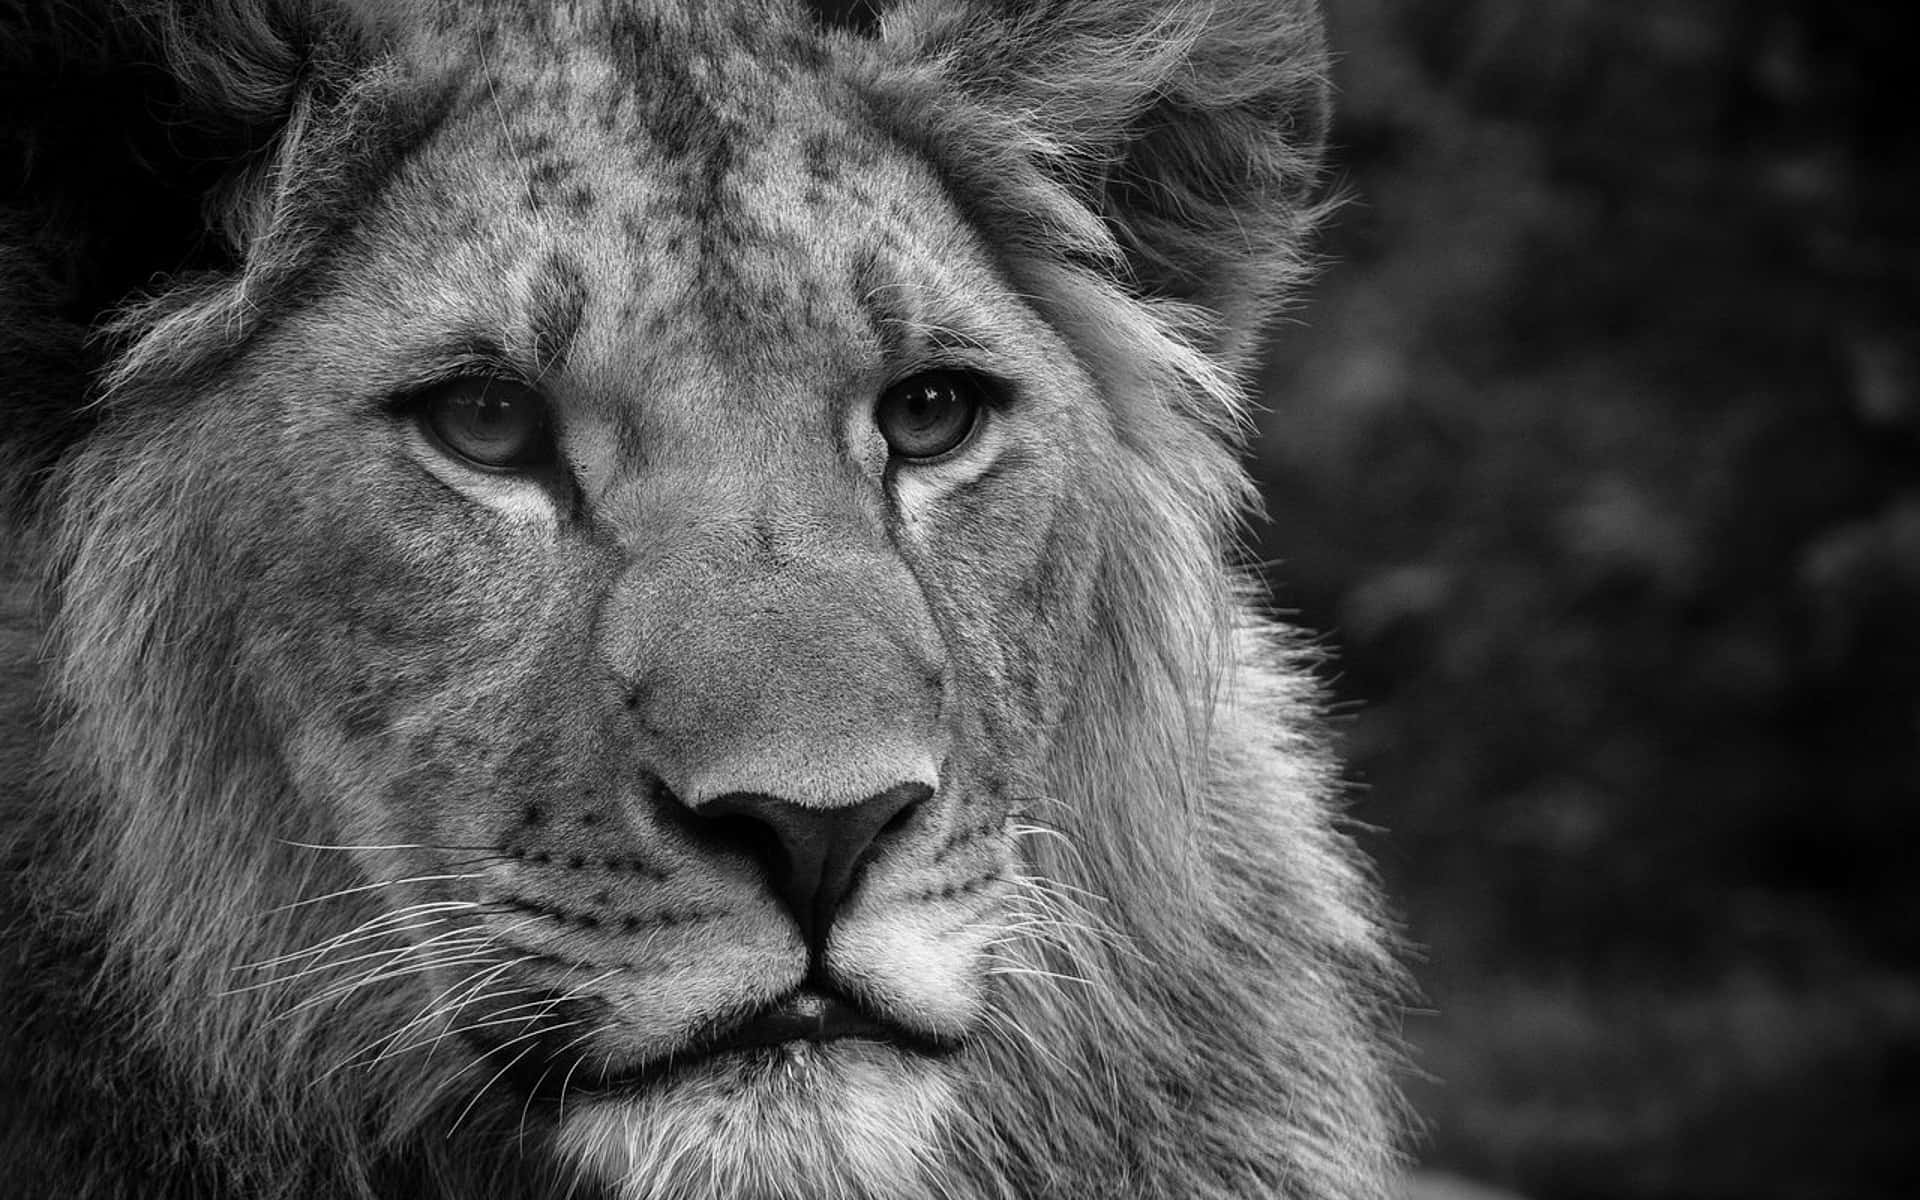 A majestic black and white lion in their natural habitat. Wallpaper